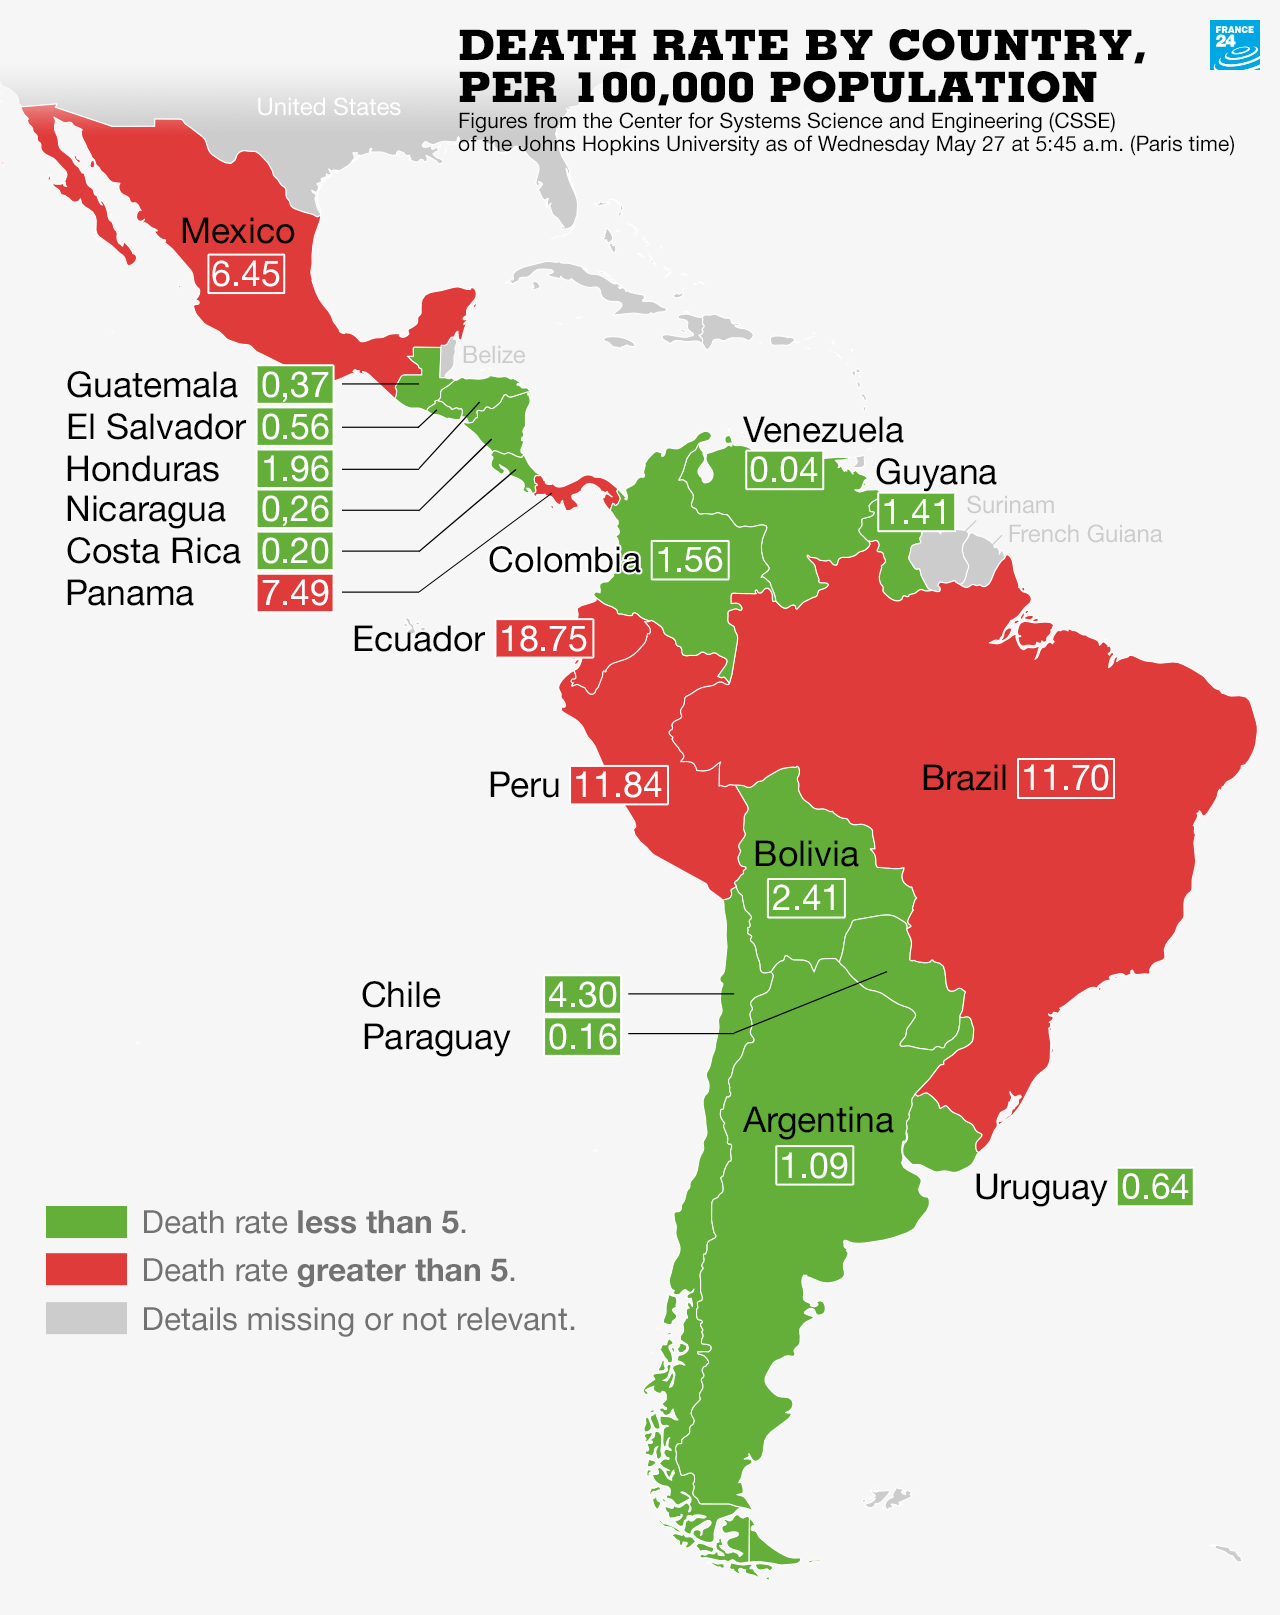 Apart from the United States, Brazil and Mexico have racked up more fatalities from the virus than any other country, and together they account for around 70% of the regional death toll.